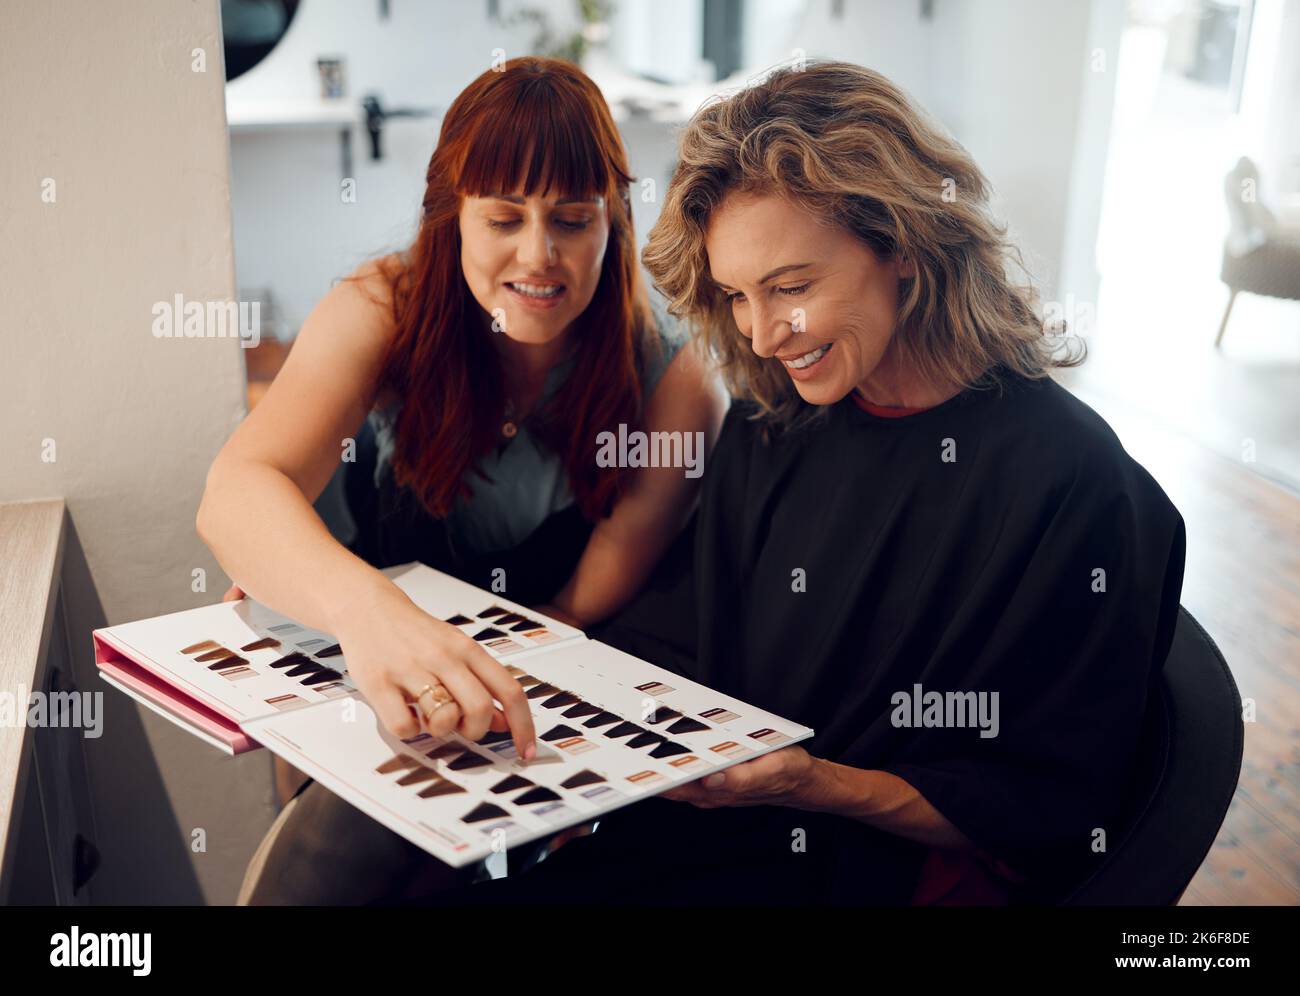 Hair salon, color catalog and consultation with woman client consultation, decision and planning advice with professional stylist in hairdresser Stock Photo